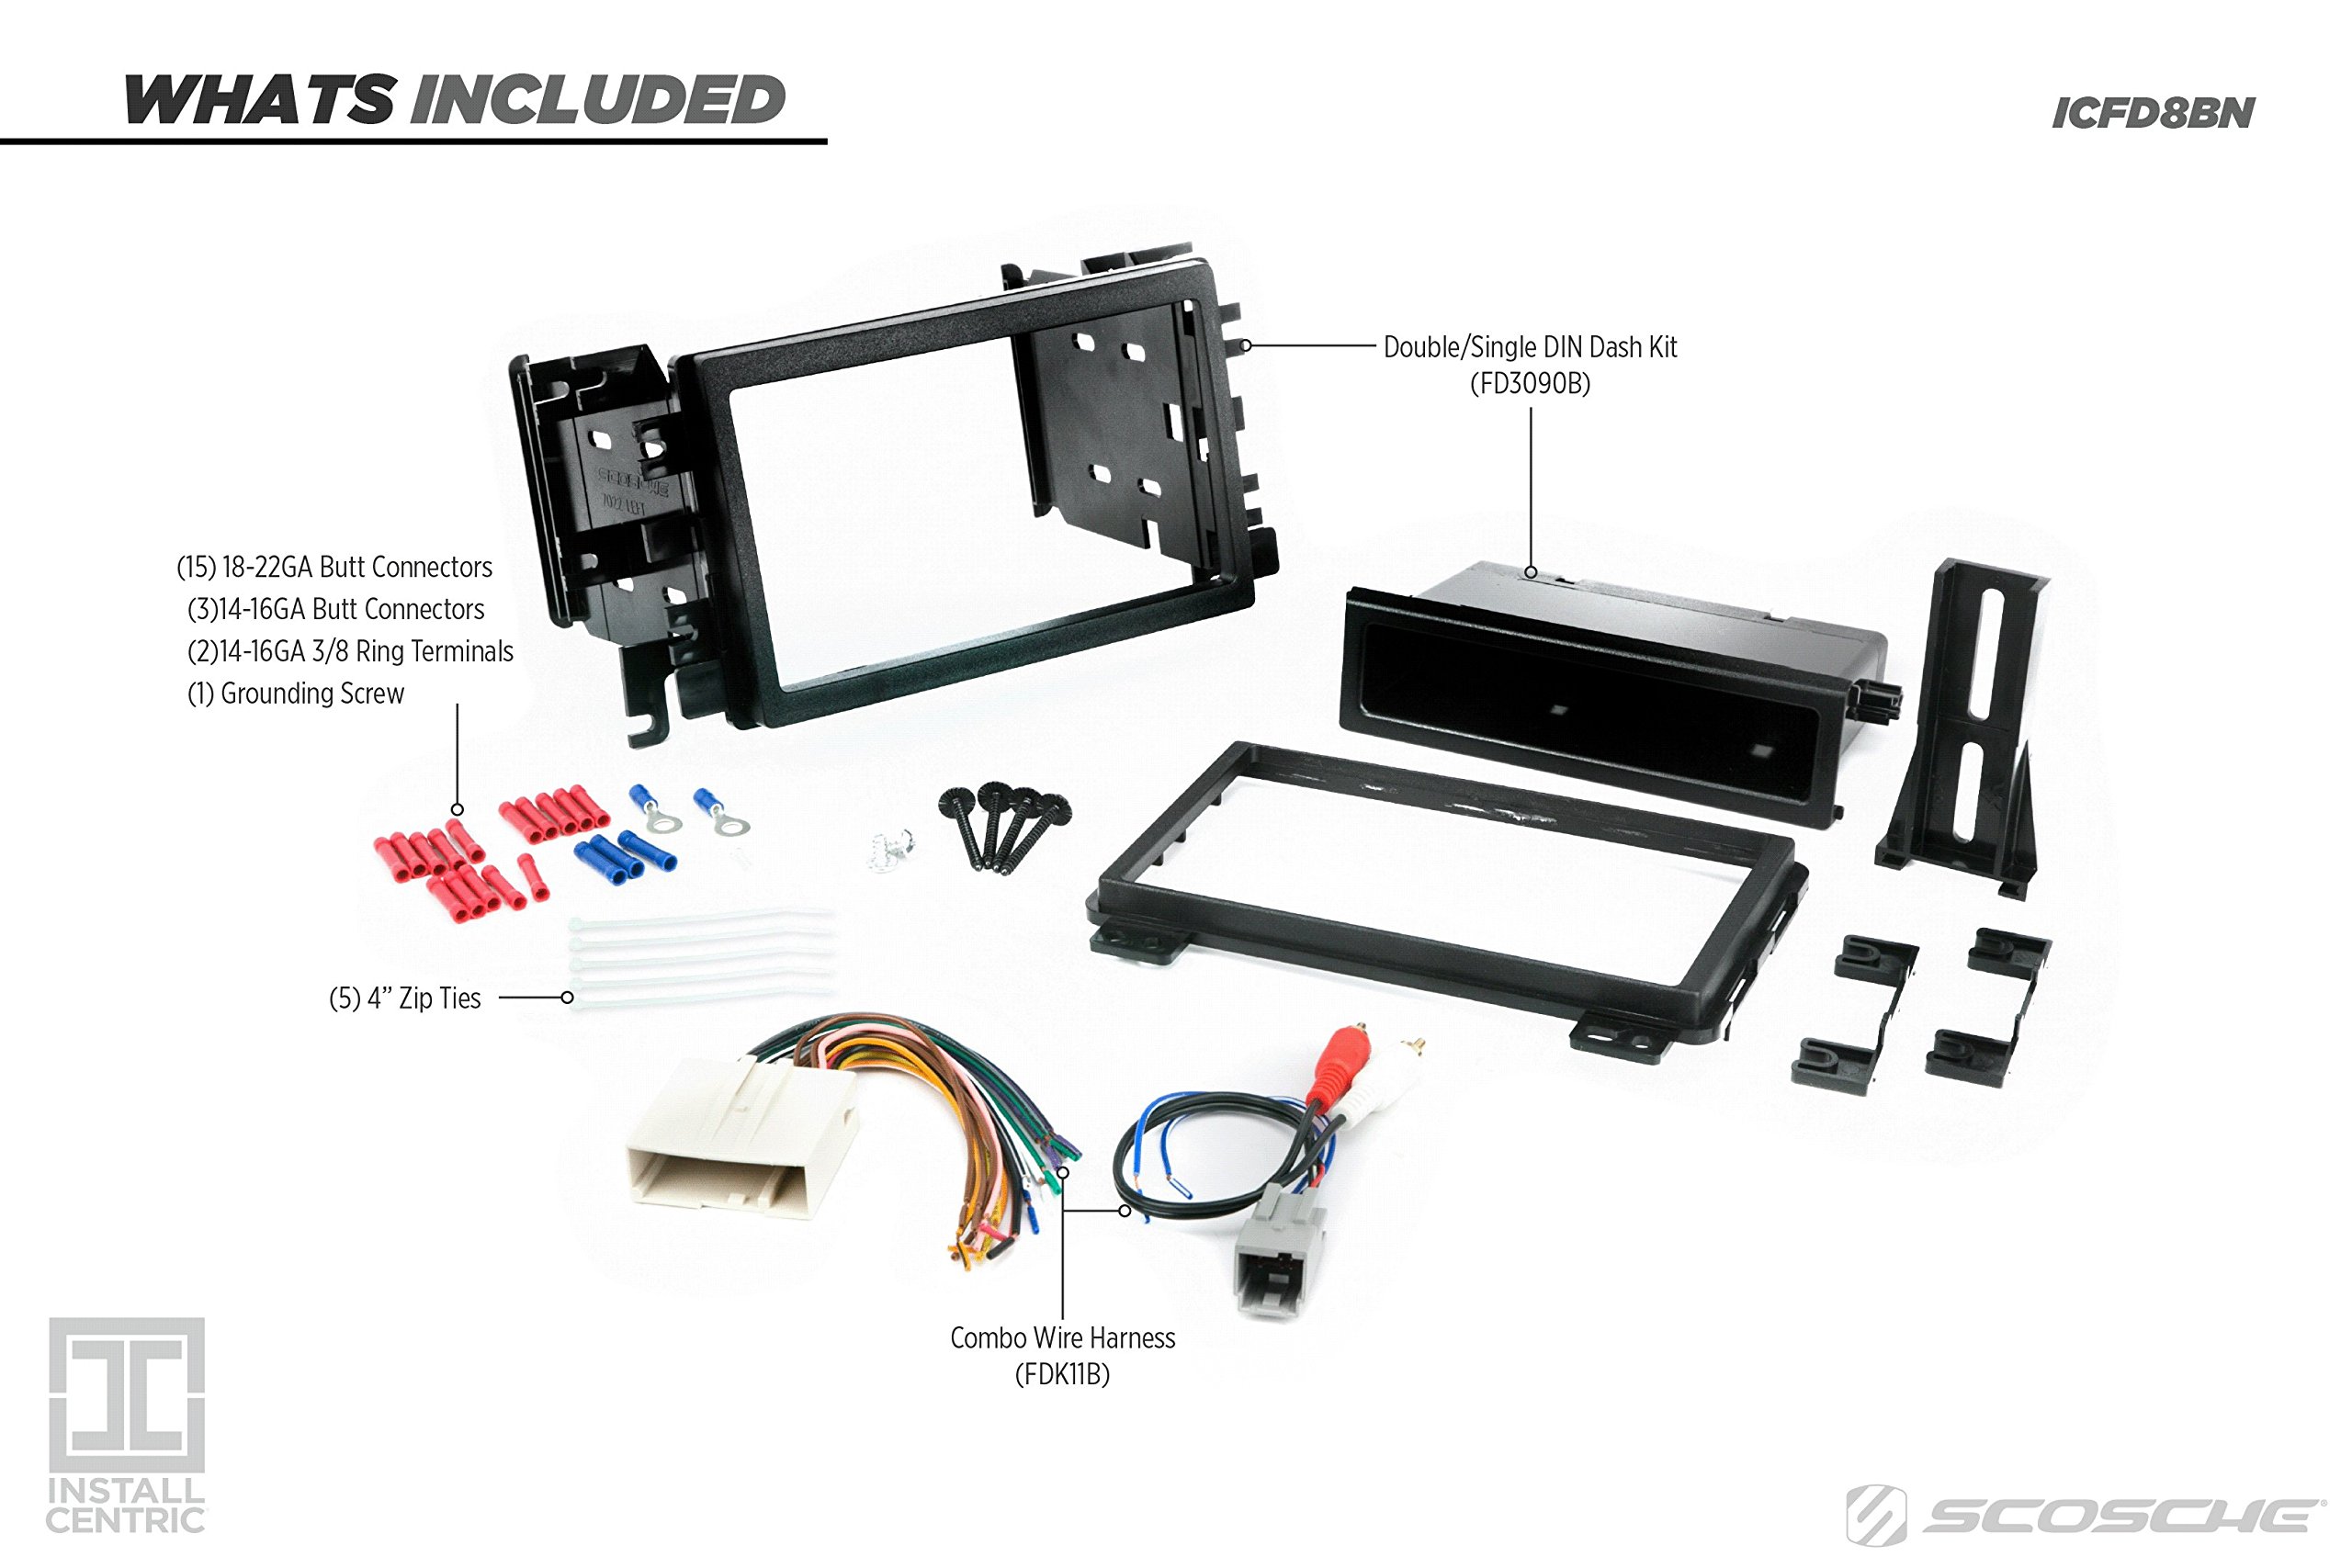 Scosche Install Centric ICFD8BN Compatible with Select Ford, Lincoln & Mercury 2004-08 Complete Installation Solution for Car Stereos, Black